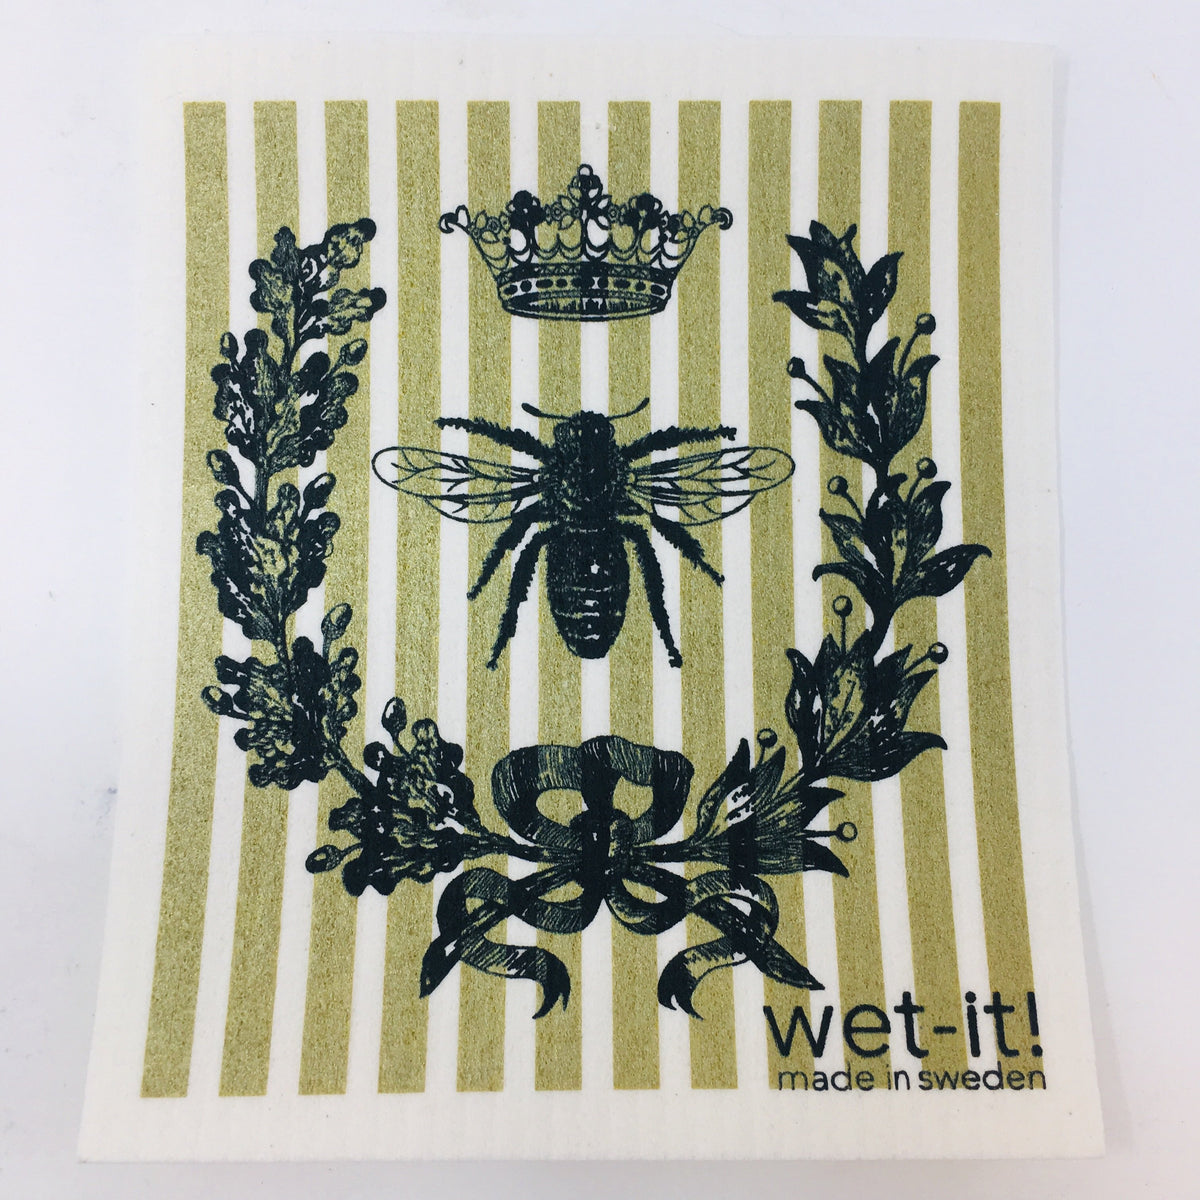 ivory colored rectangle shaped scrubbing pad with a black crown of flowers around a bee with a crown above it on top of a gold striped background screen printed on it